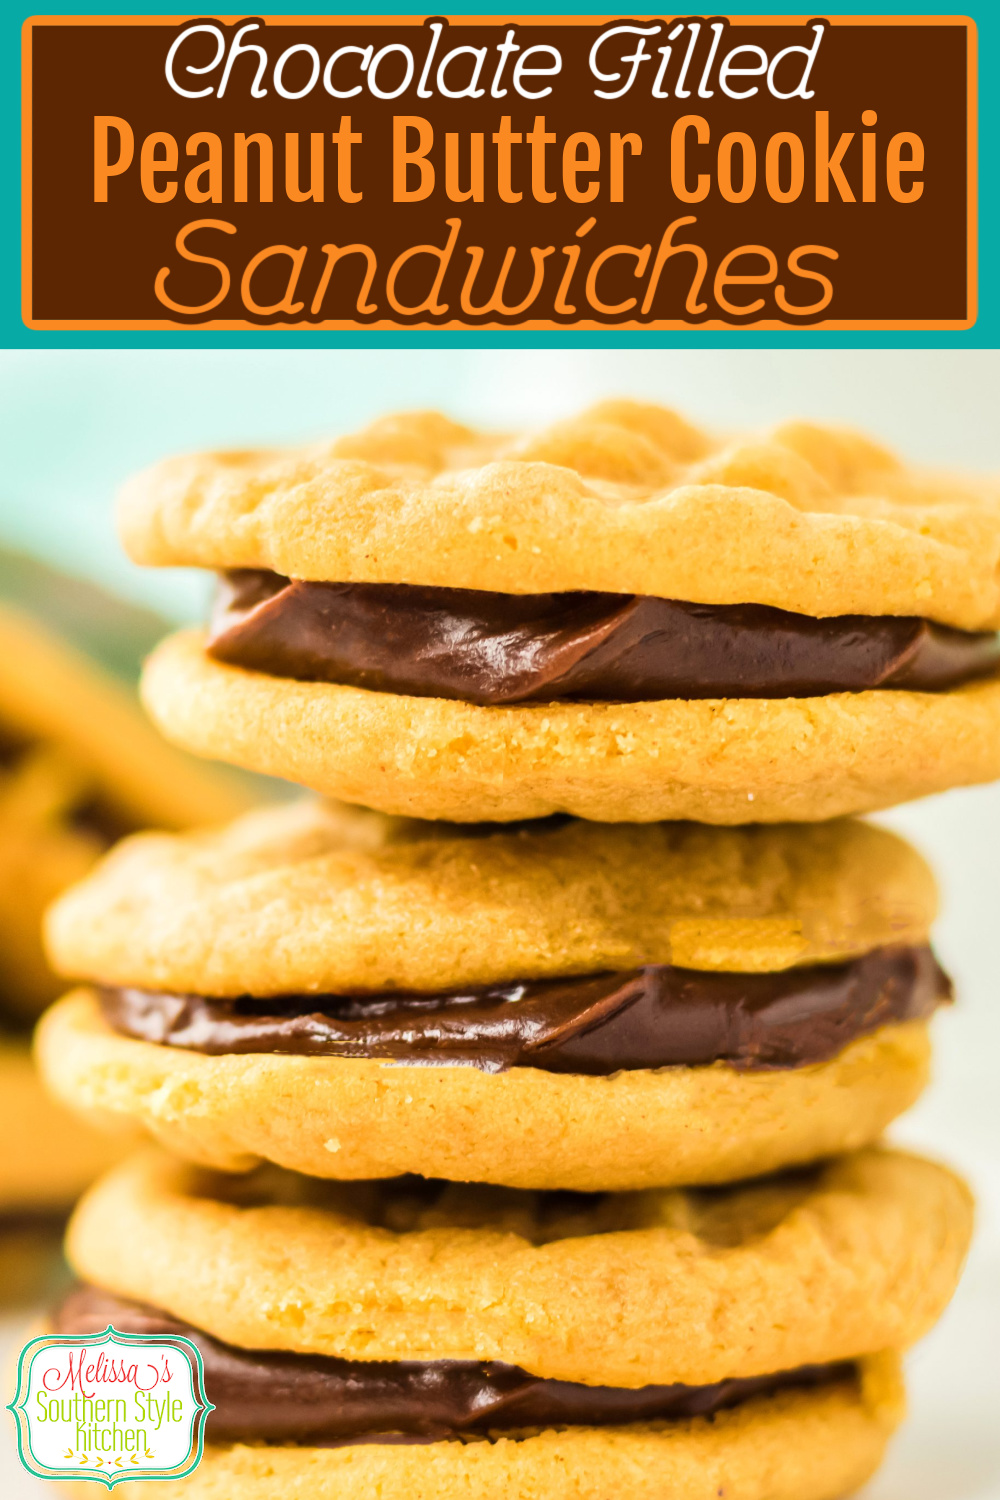 These Peanut Butter Cookie Sandwiches are filled with chocolate ganache for the ultimate cookie treat #peanutbutter #peanutbuttercookies #sandwichcookies #chocolate #chocolateganache #ganacherecipes #cookierecipes #easypeanutbuttercookies via @melissasssk